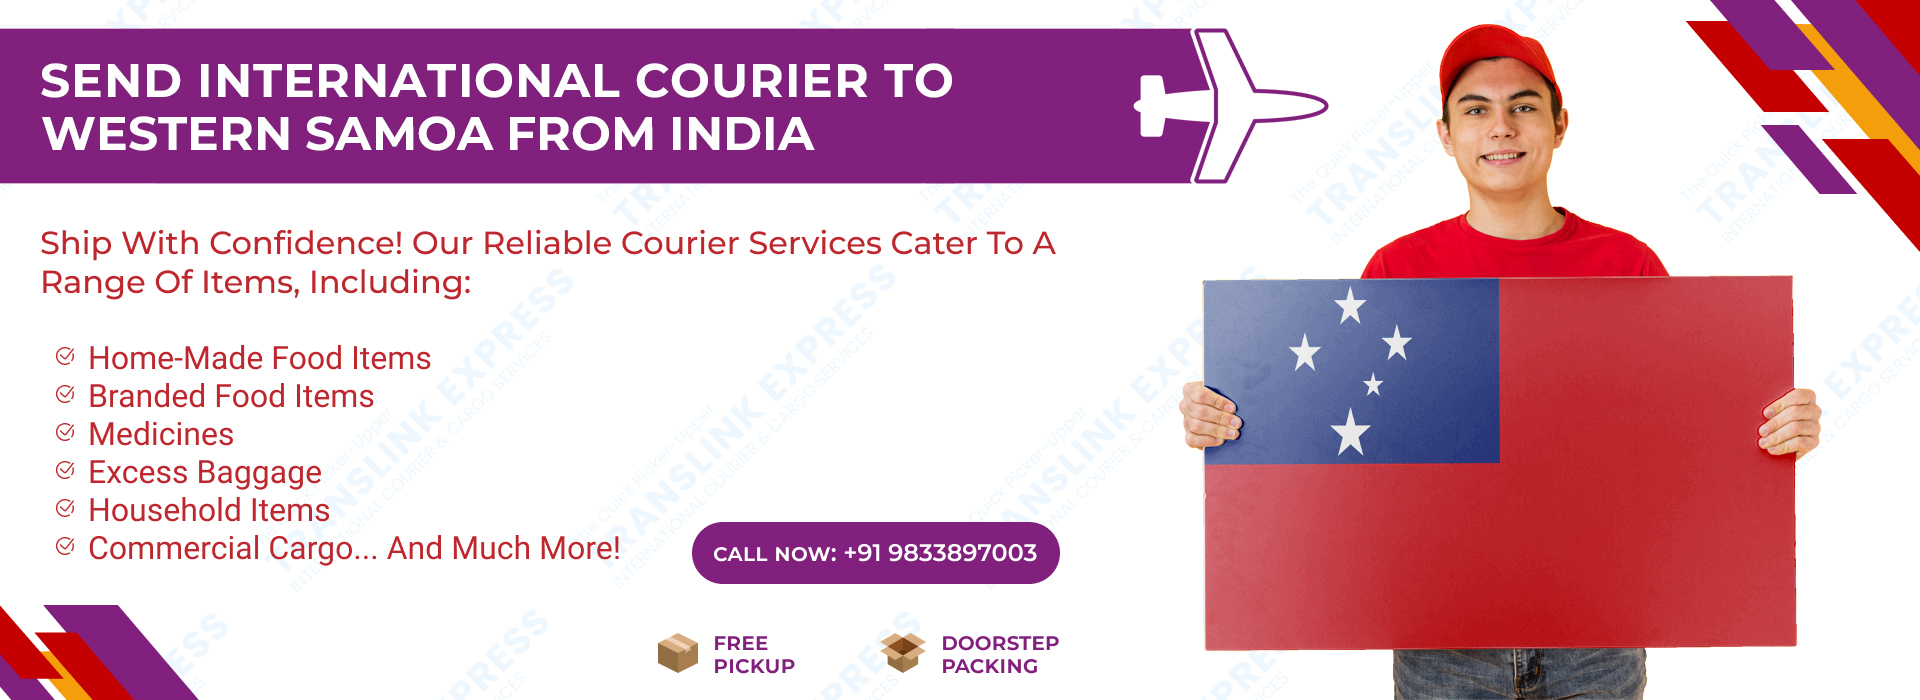 Courier to Western Samoa From India